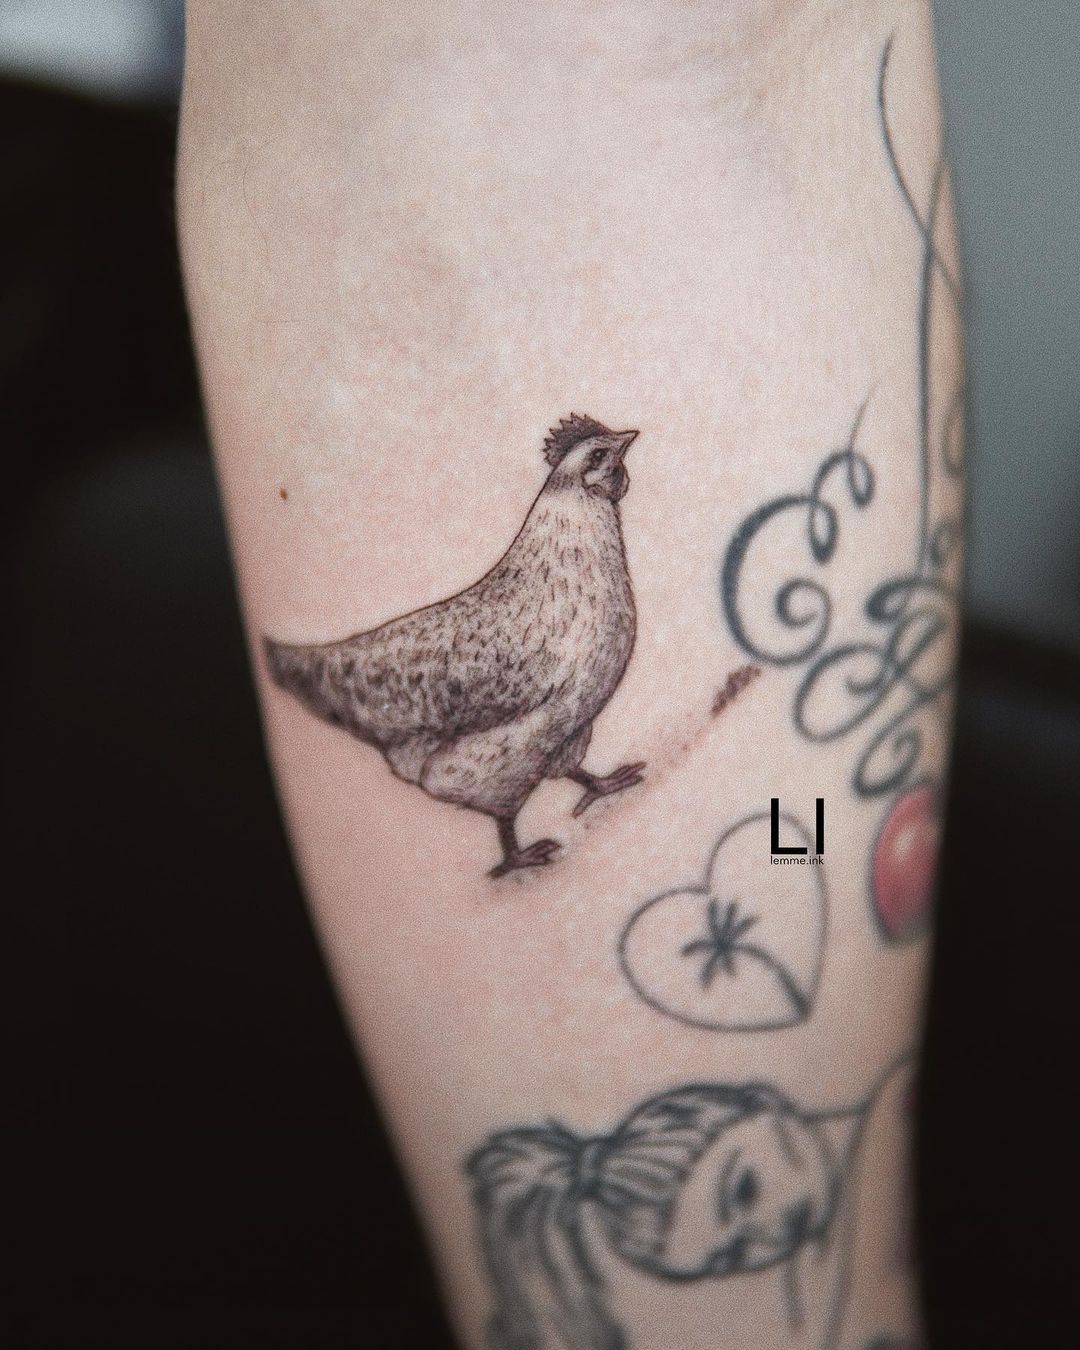 I got a tattoo of one of my chickens  rchickens